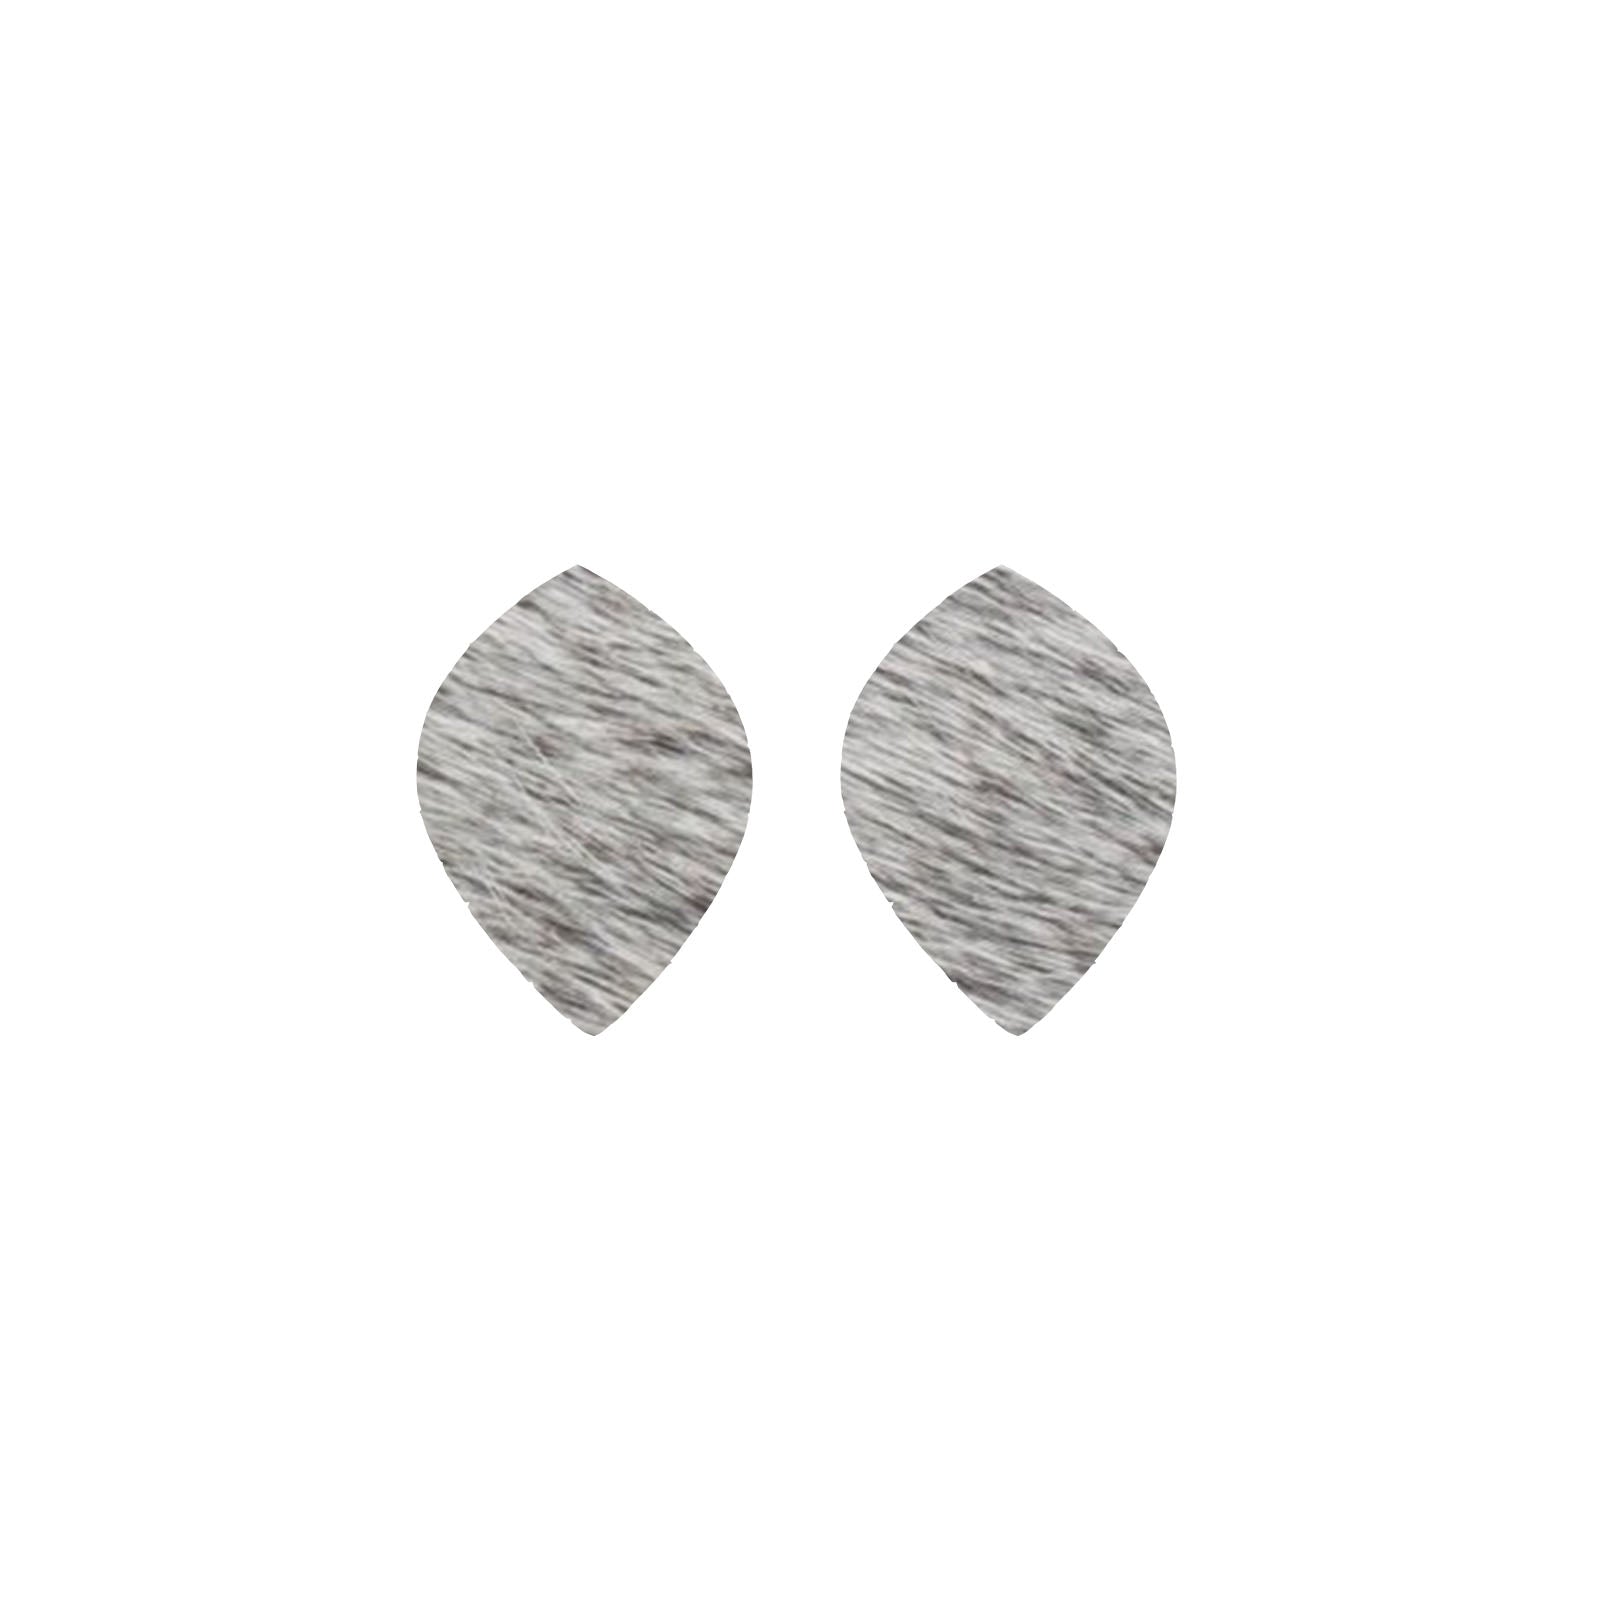 Peppered Light to Medium Grey Hair On Die Cut Earrings, Small Leaf | The Leather Guy